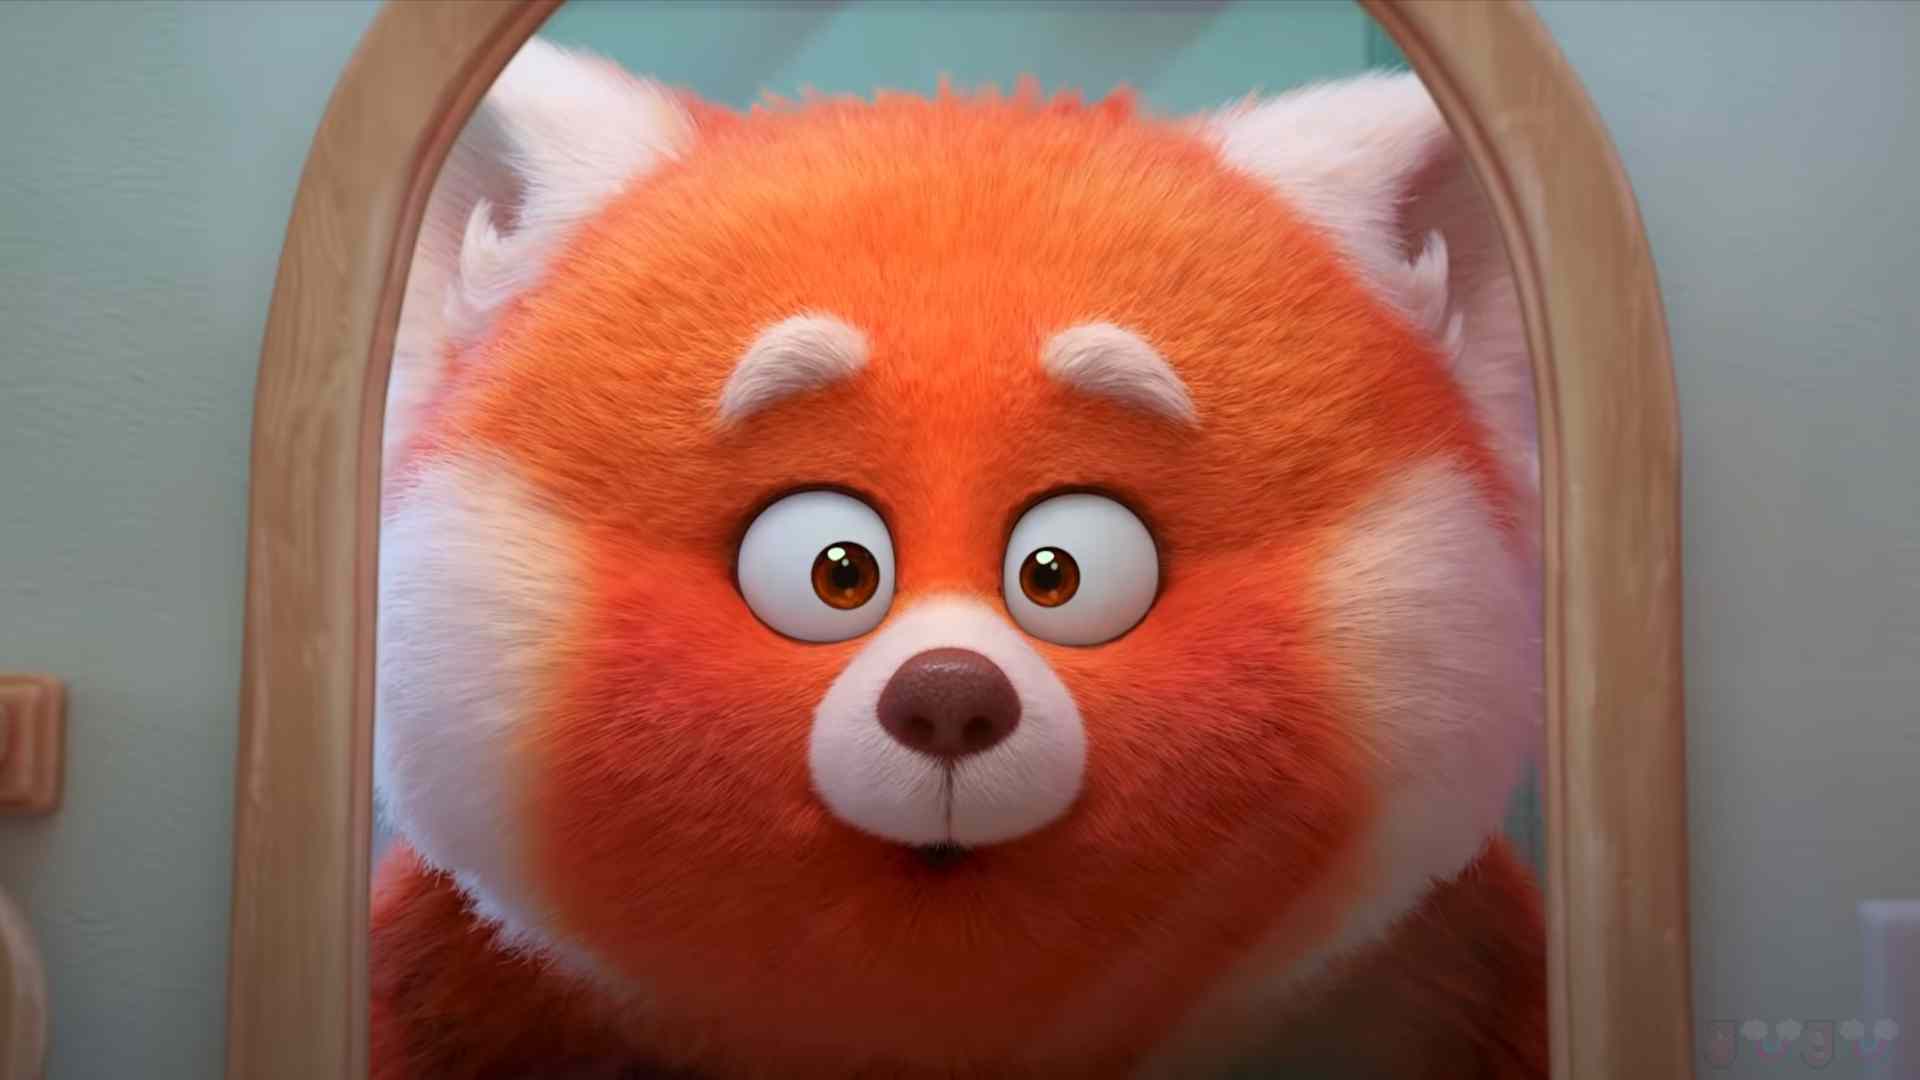 Turning Red Wallpapers and Images cute panda face in movie with soft and clear face pics 2022